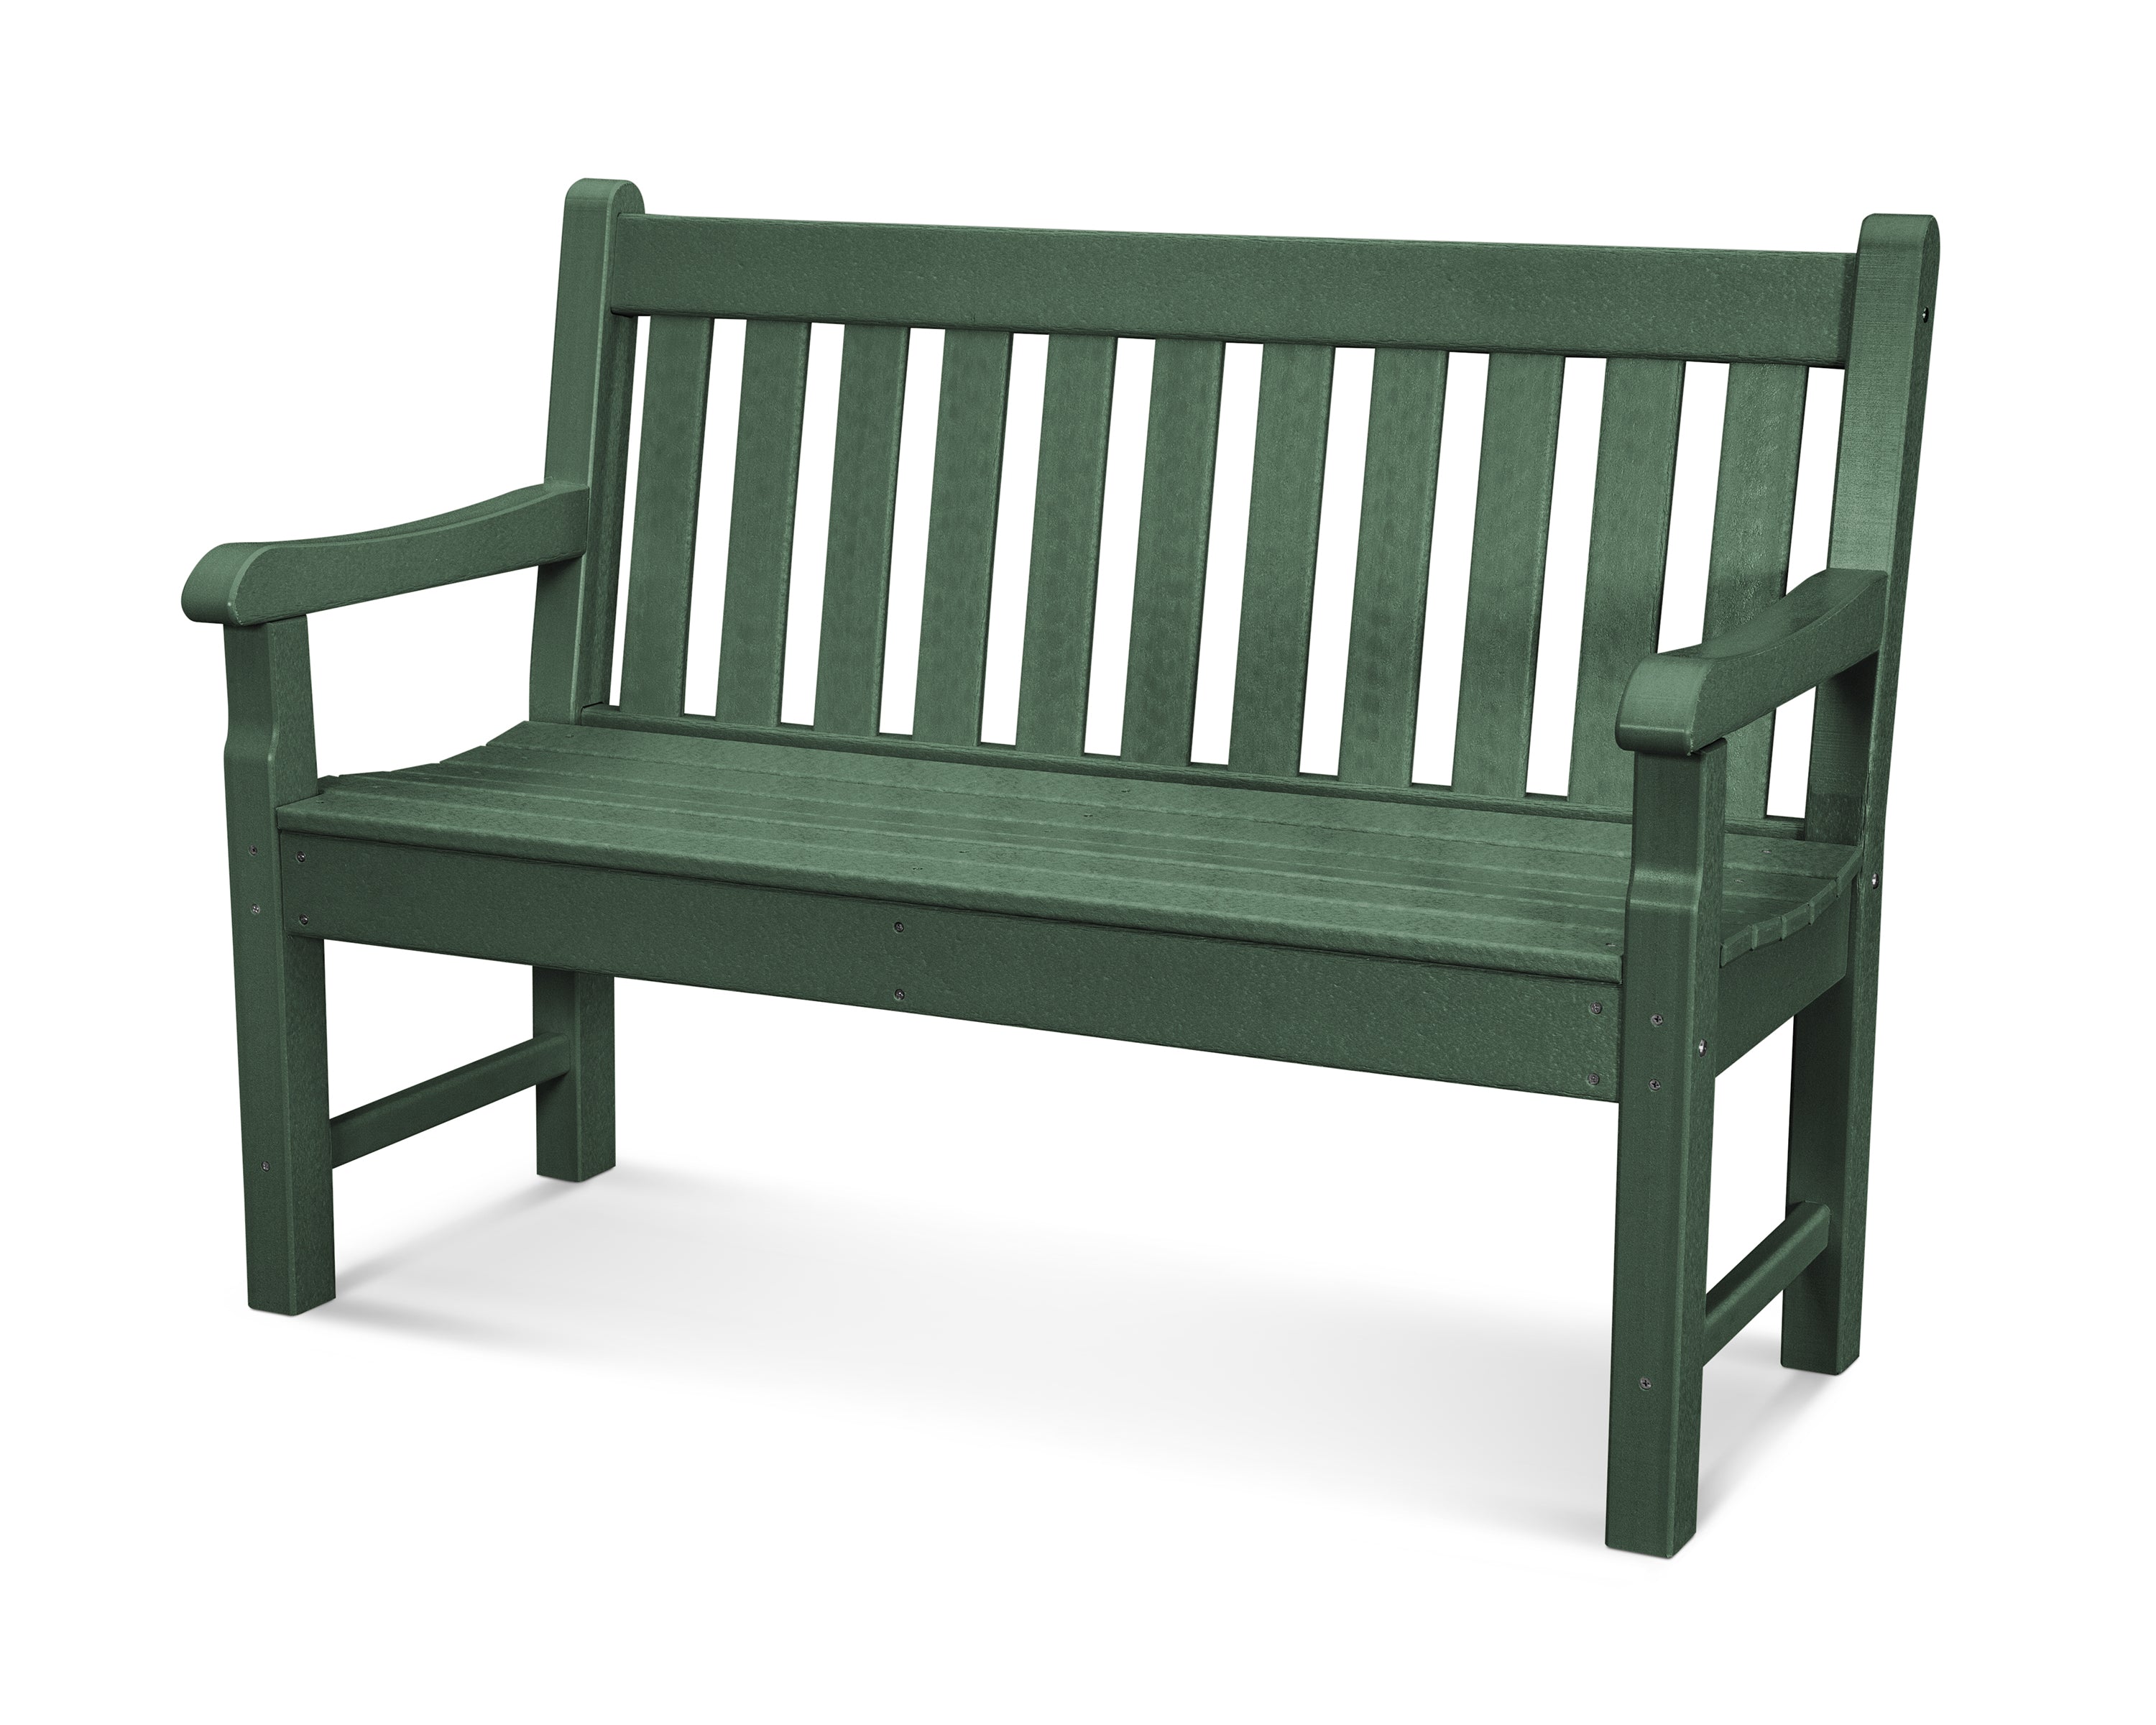 POLYWOOD® Rockford 48" Bench in Green